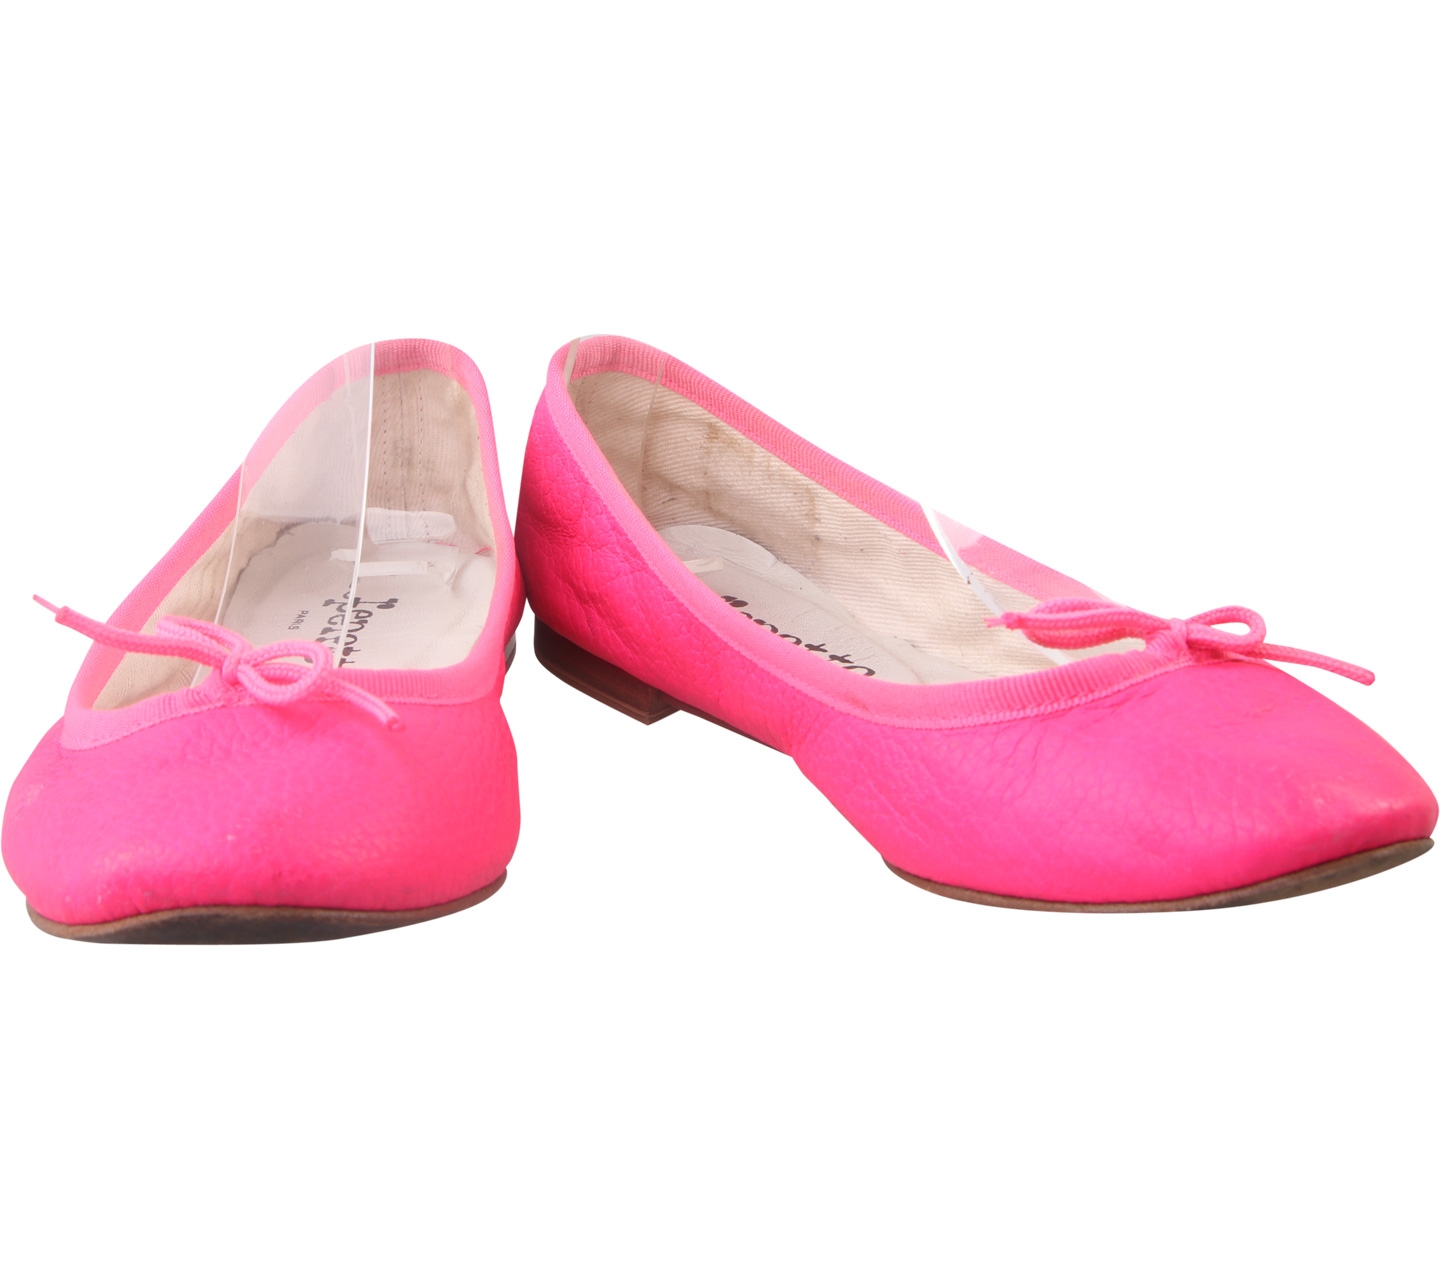 Repetto Pink Flats